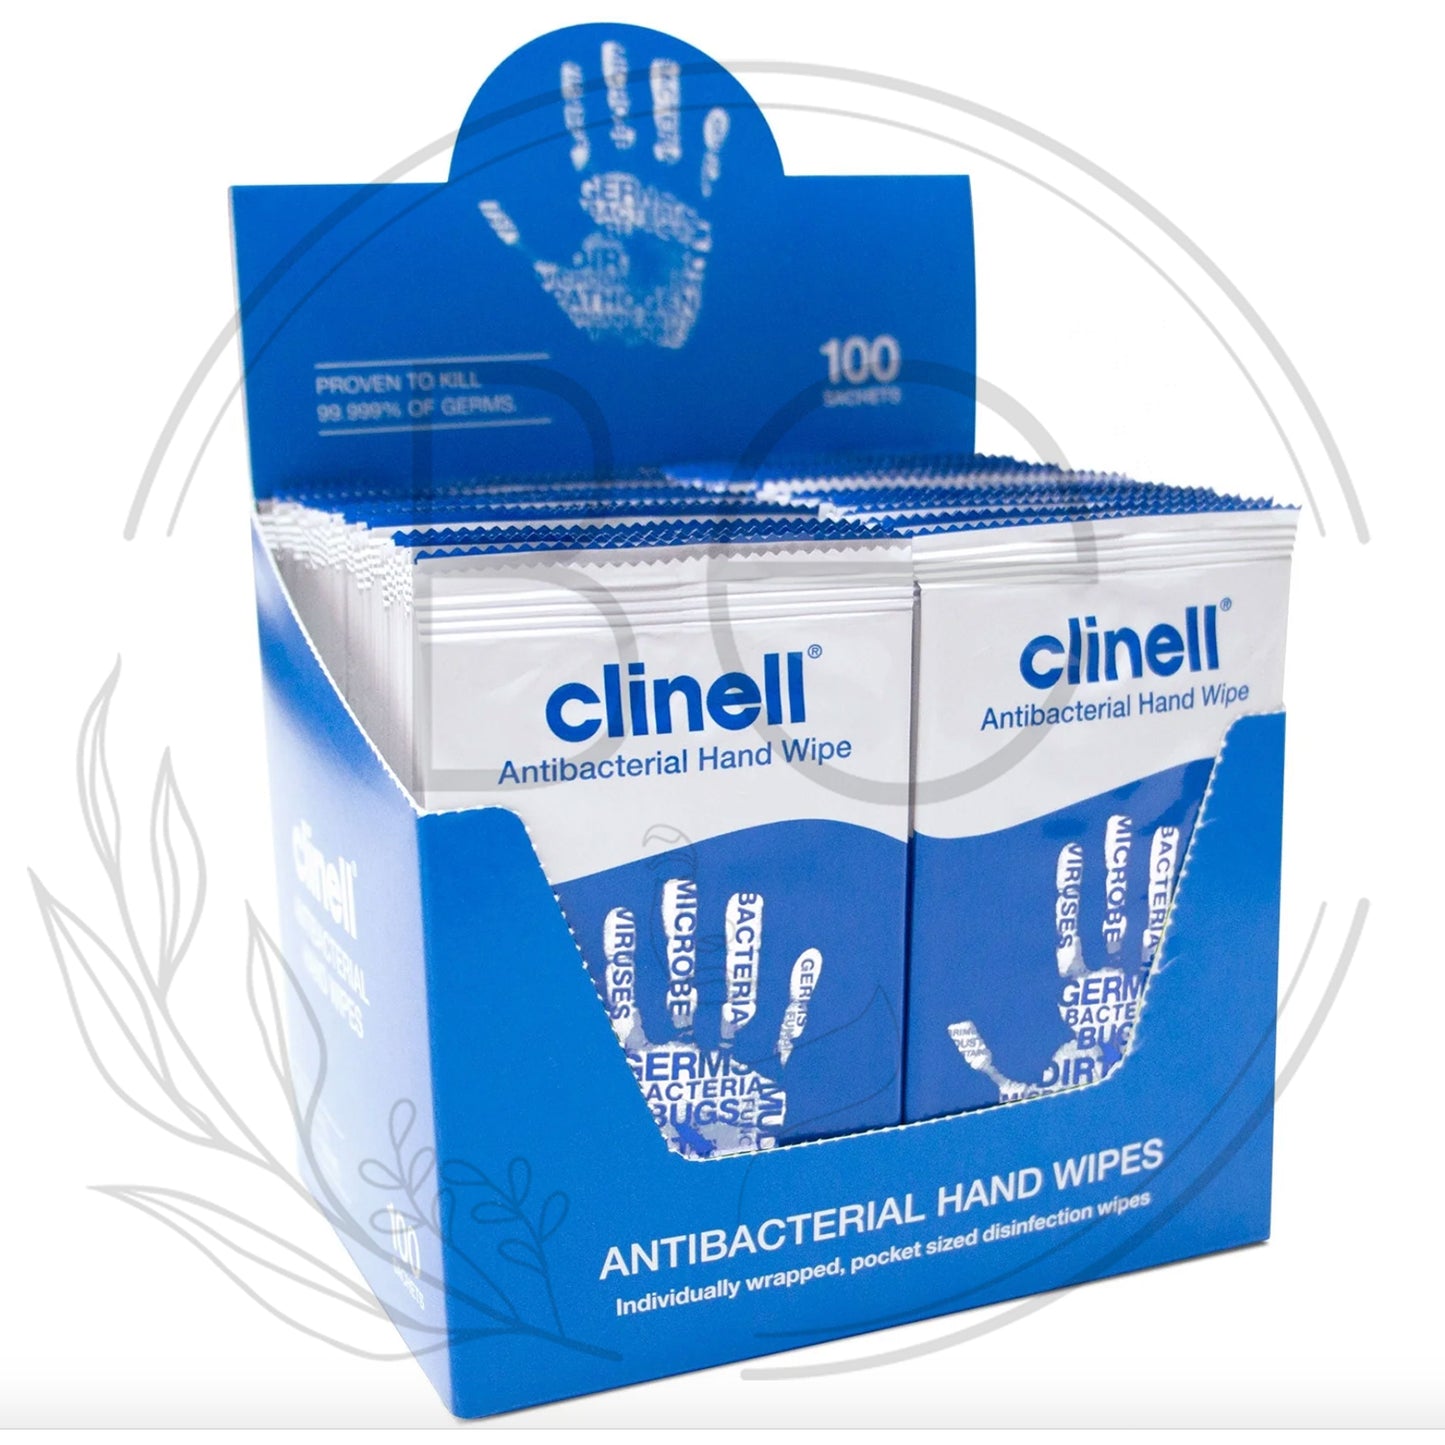 Clinell - Antibacterial Hand Wipes - Pack of 100